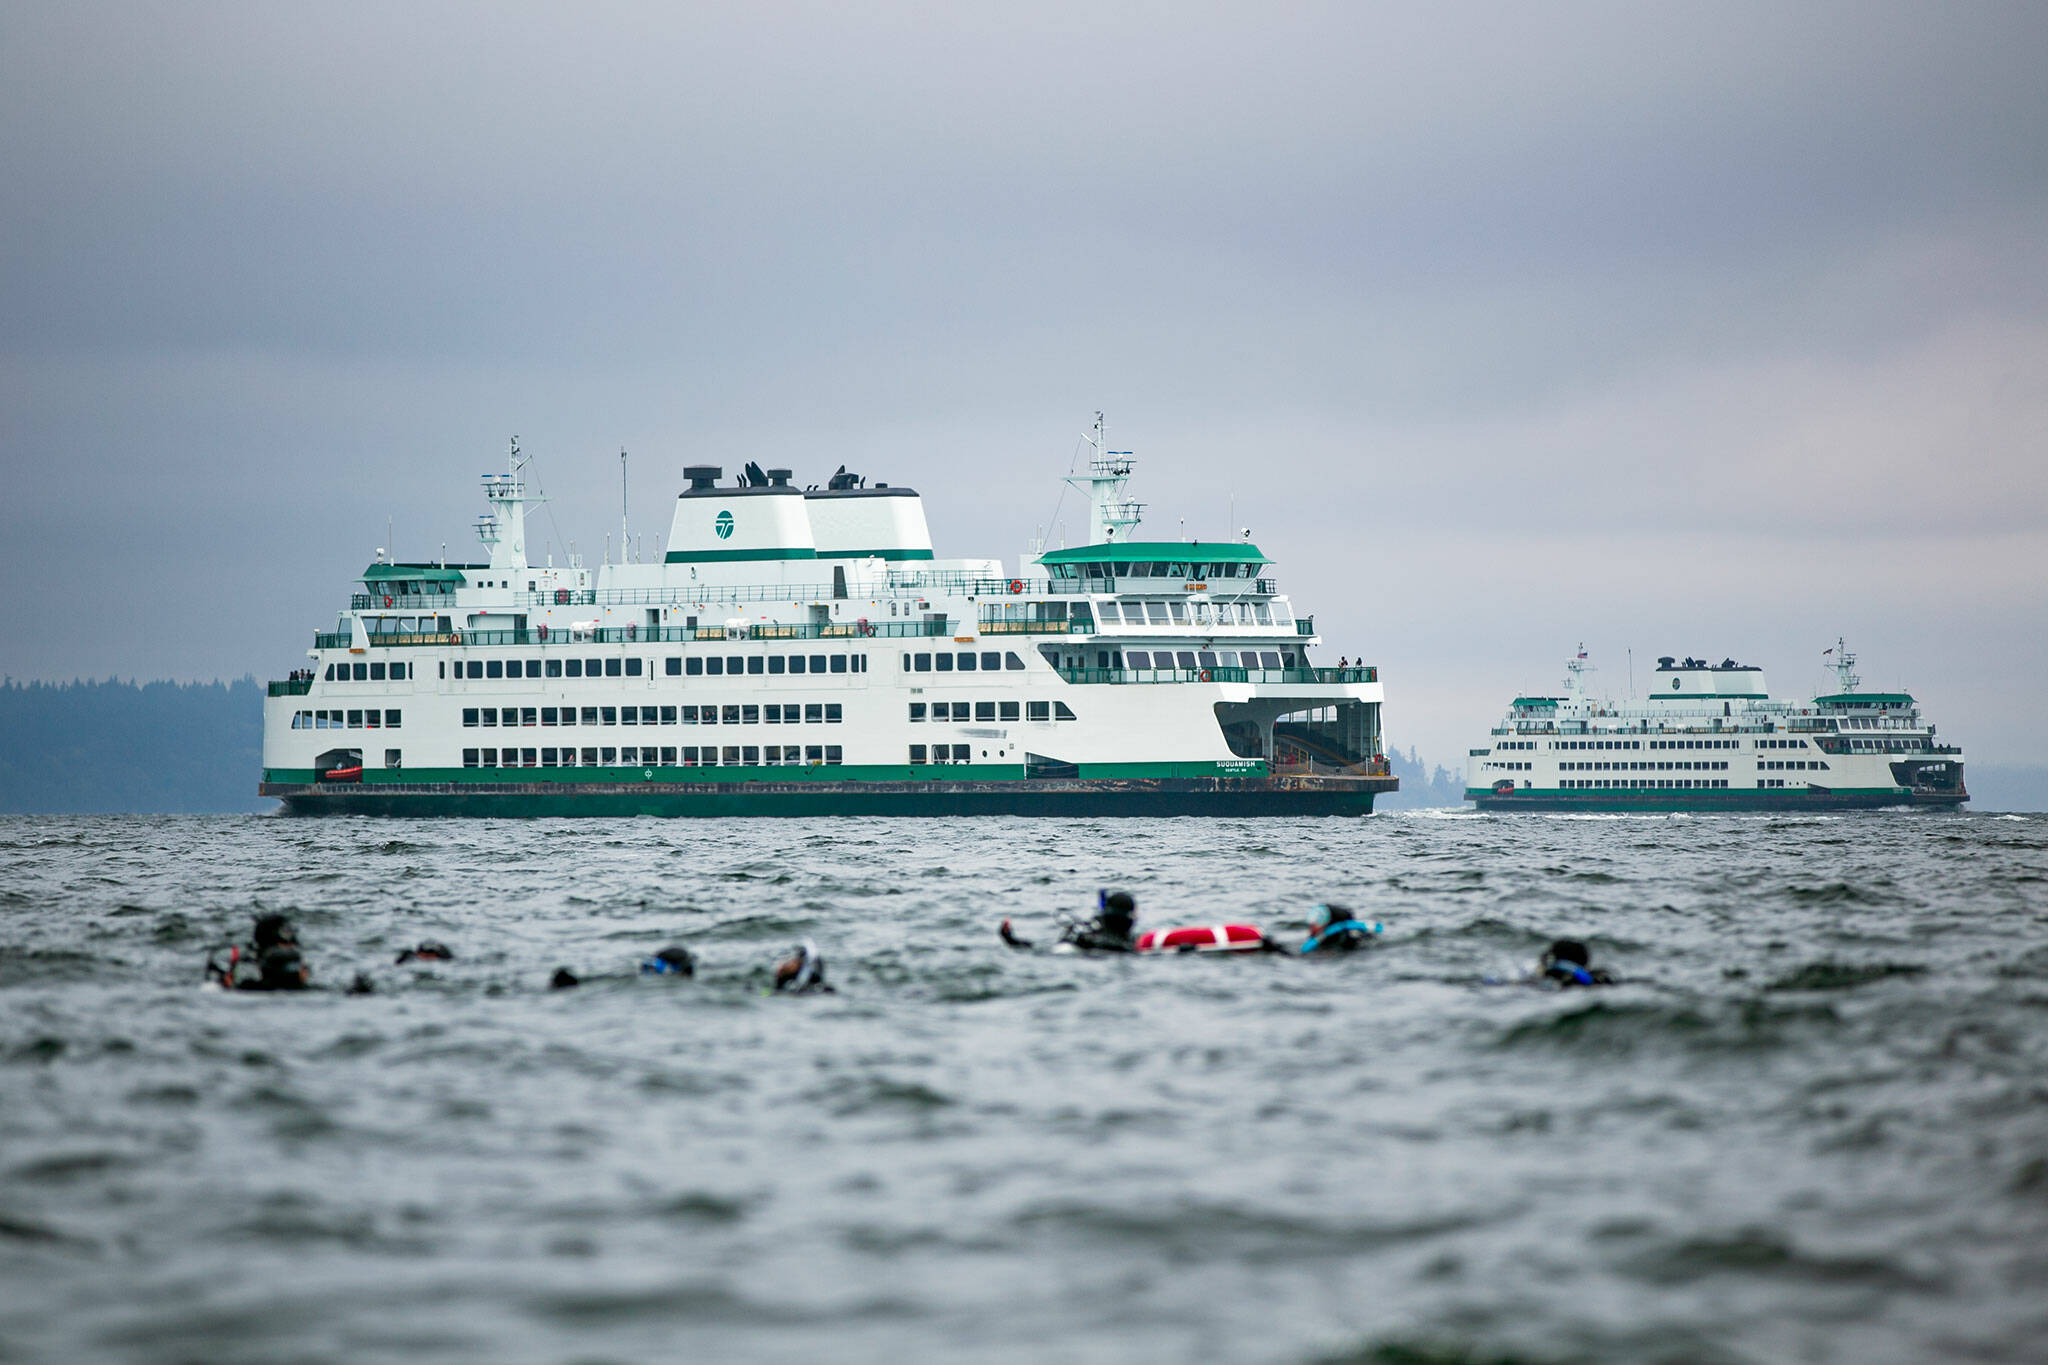 Ryan Berry / The Herald
Two Washington State ferries pass along the route between Mukilteo and Clinton as scuba divers swim near the shore Sunday, Oct. 22, 2023, in Mukilteo, Washington.